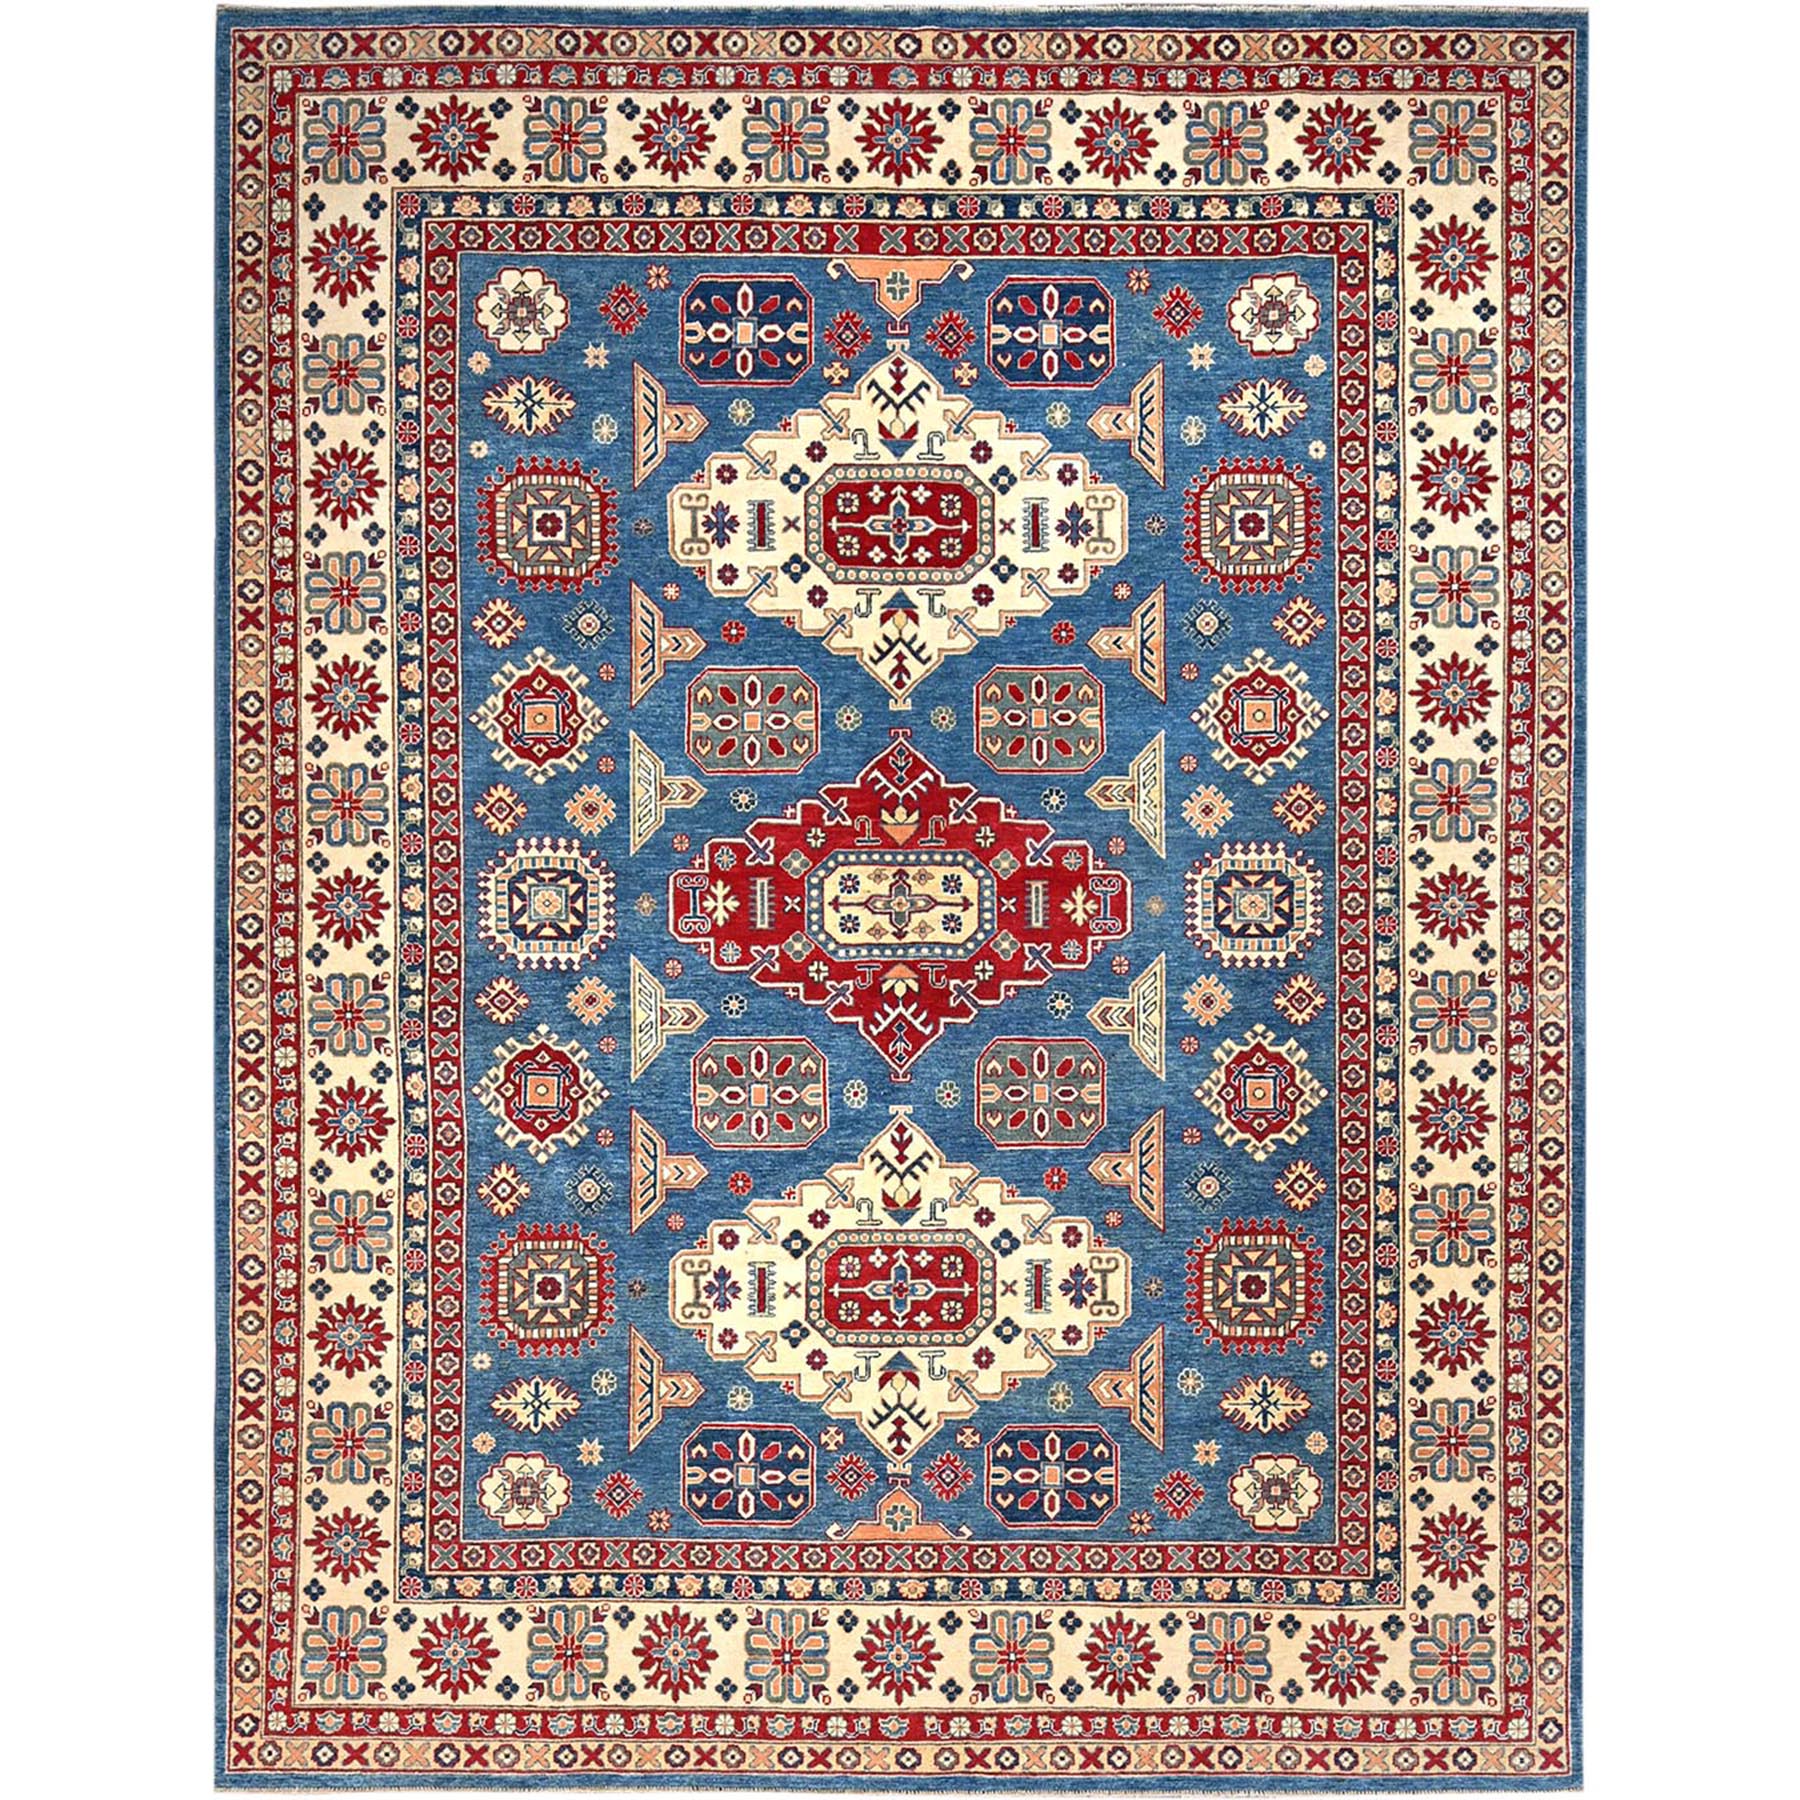 Quiet Harbor Blue, Navajo White Border, Hand Knotted Natural Dyes With Densely Woven Pure Wool Kazak, Tribal Pattern, Oriental Rug 